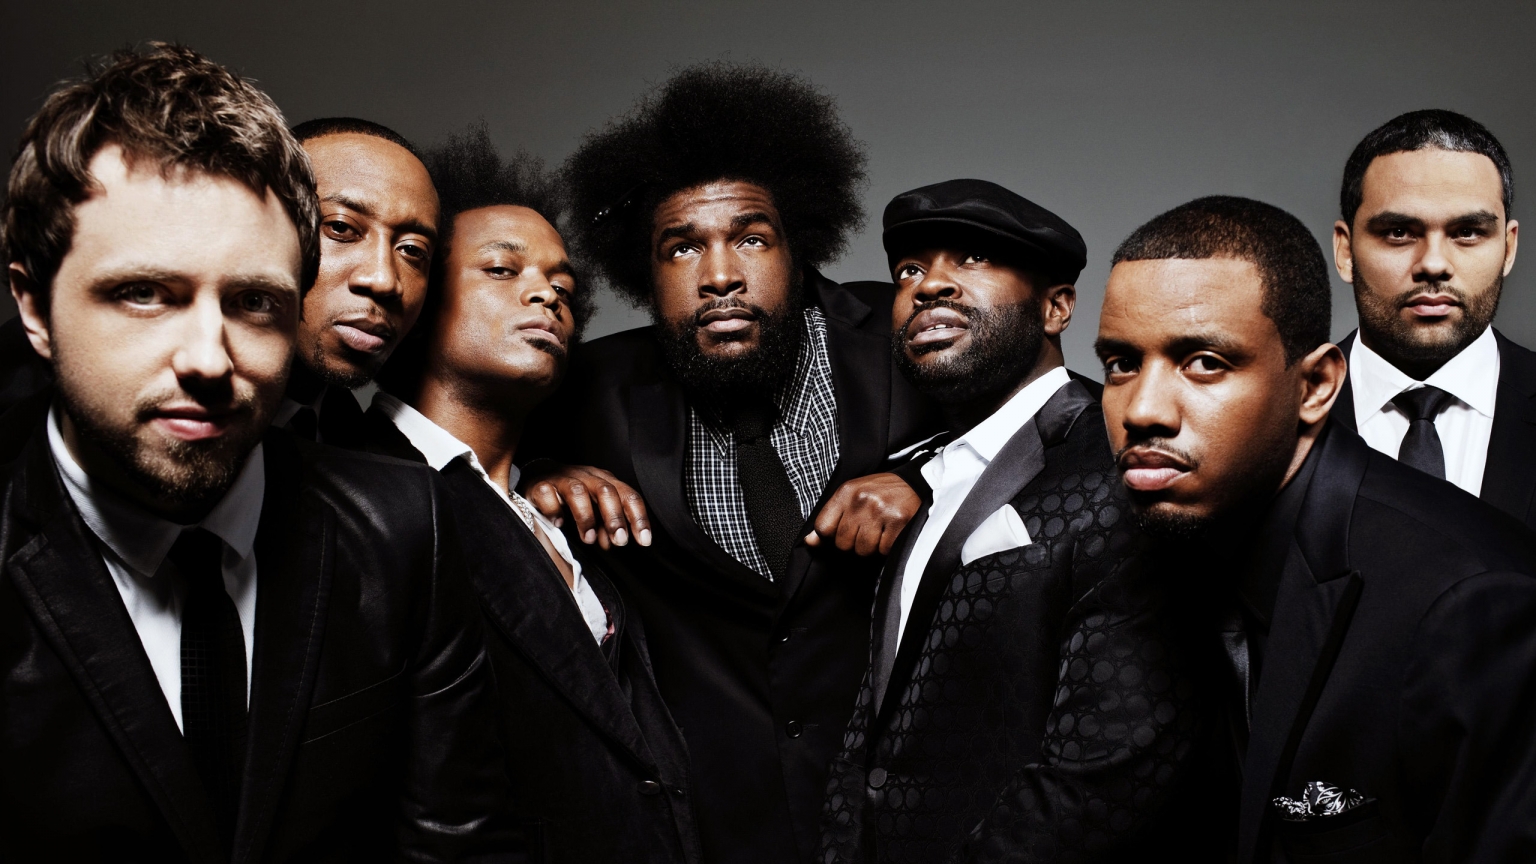 The Roots Band Photo Session for 1536 x 864 HDTV resolution